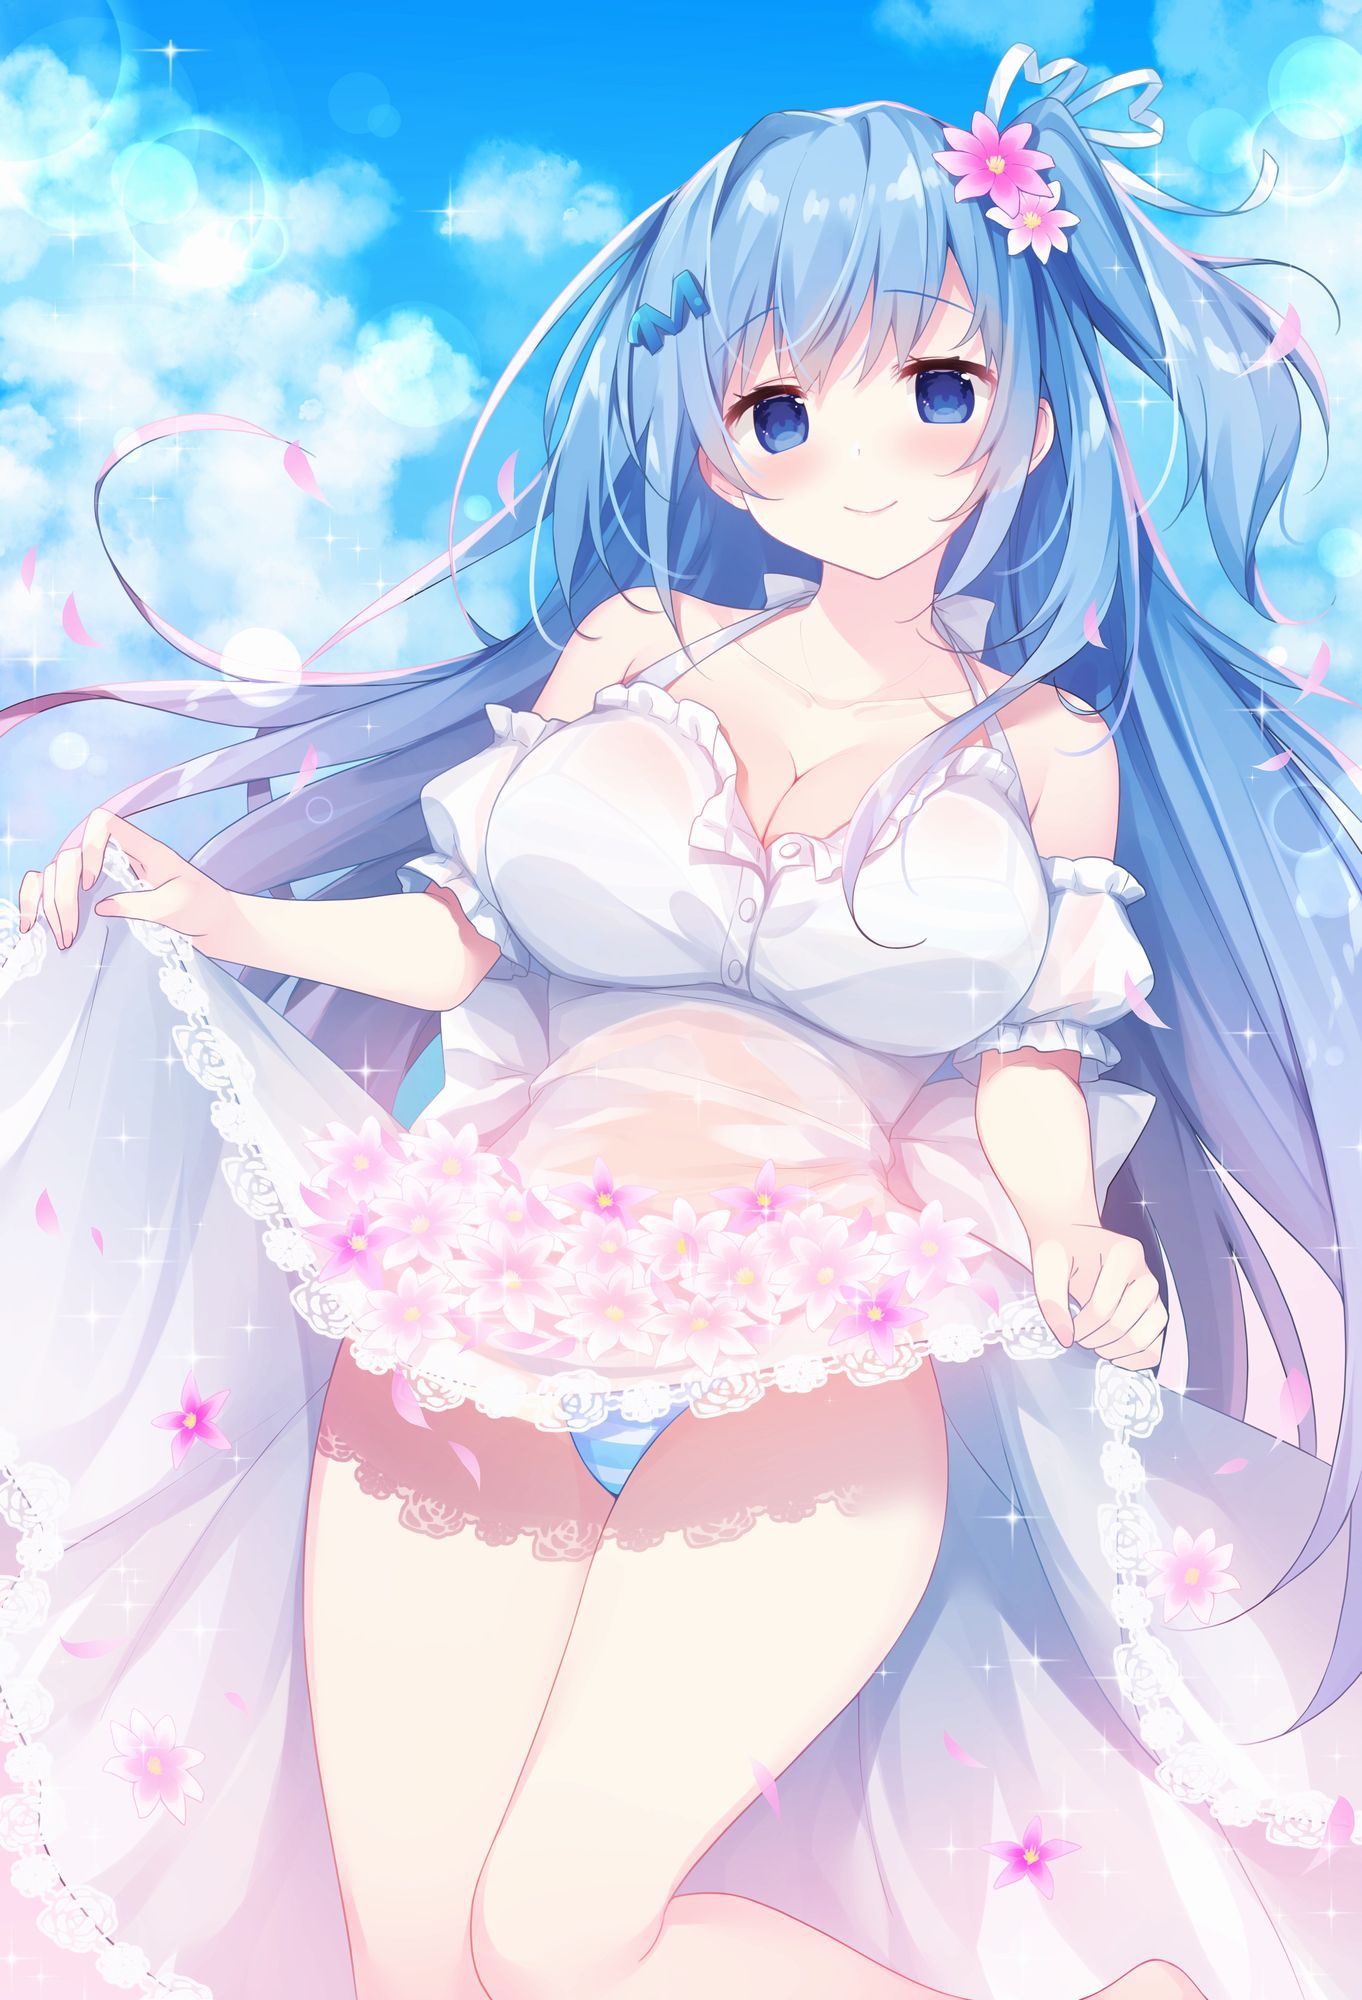 [2nd] Secondary erotic image of a girl with blue or light blue hair Part 18 [ blue hair ] 22